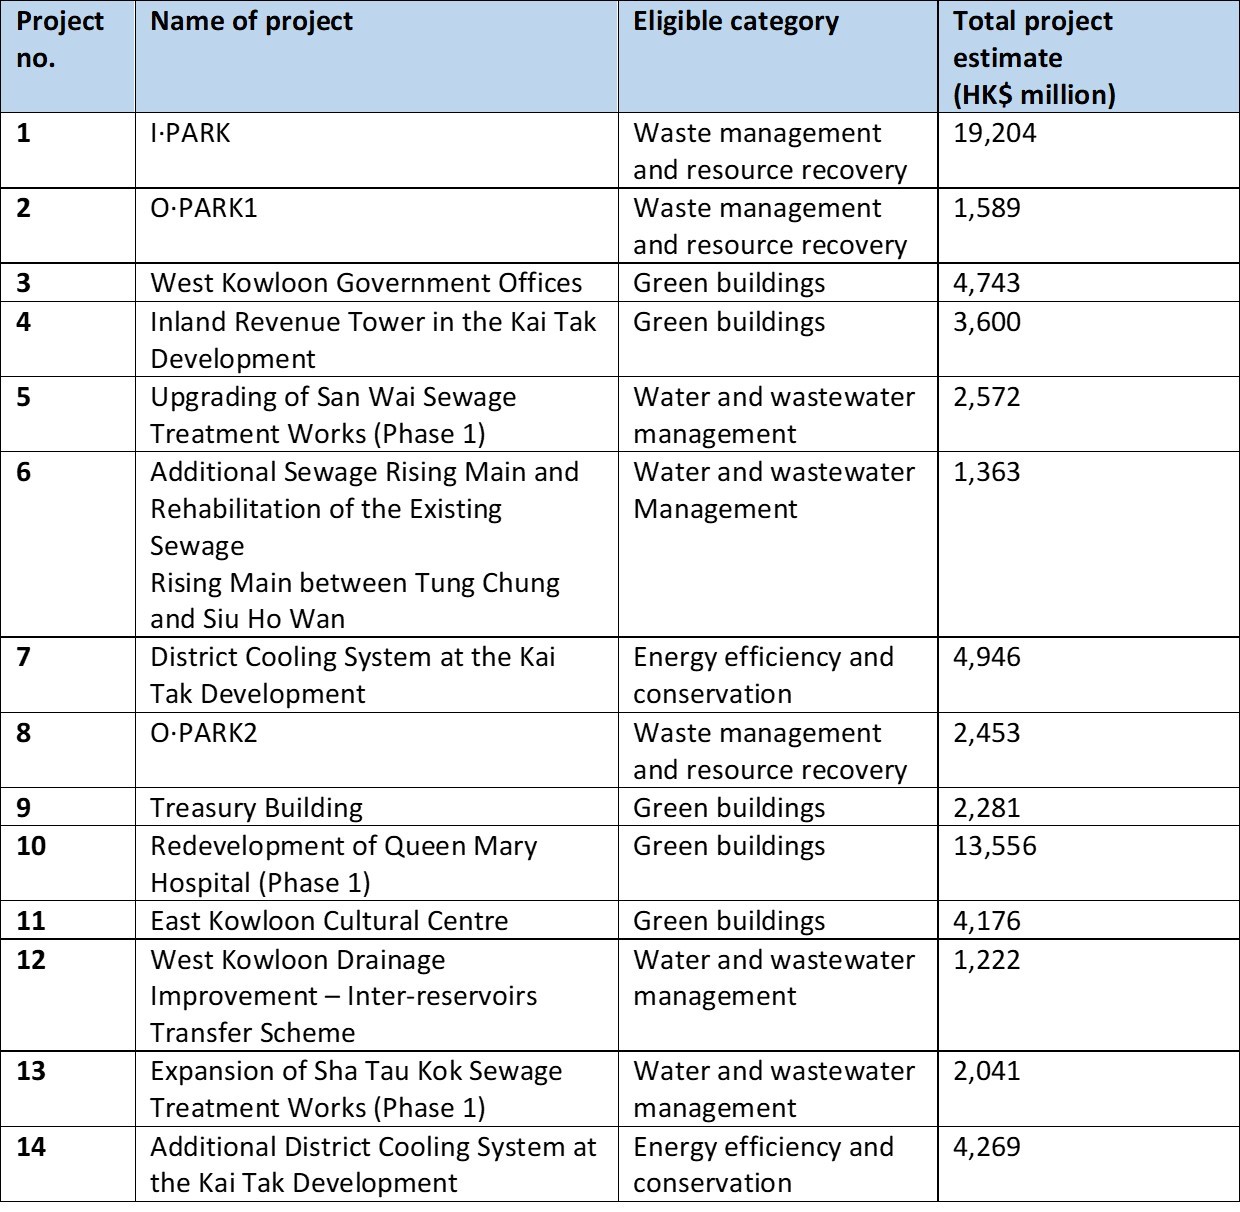 14 eligible projects have been identified as at 31 July 2021